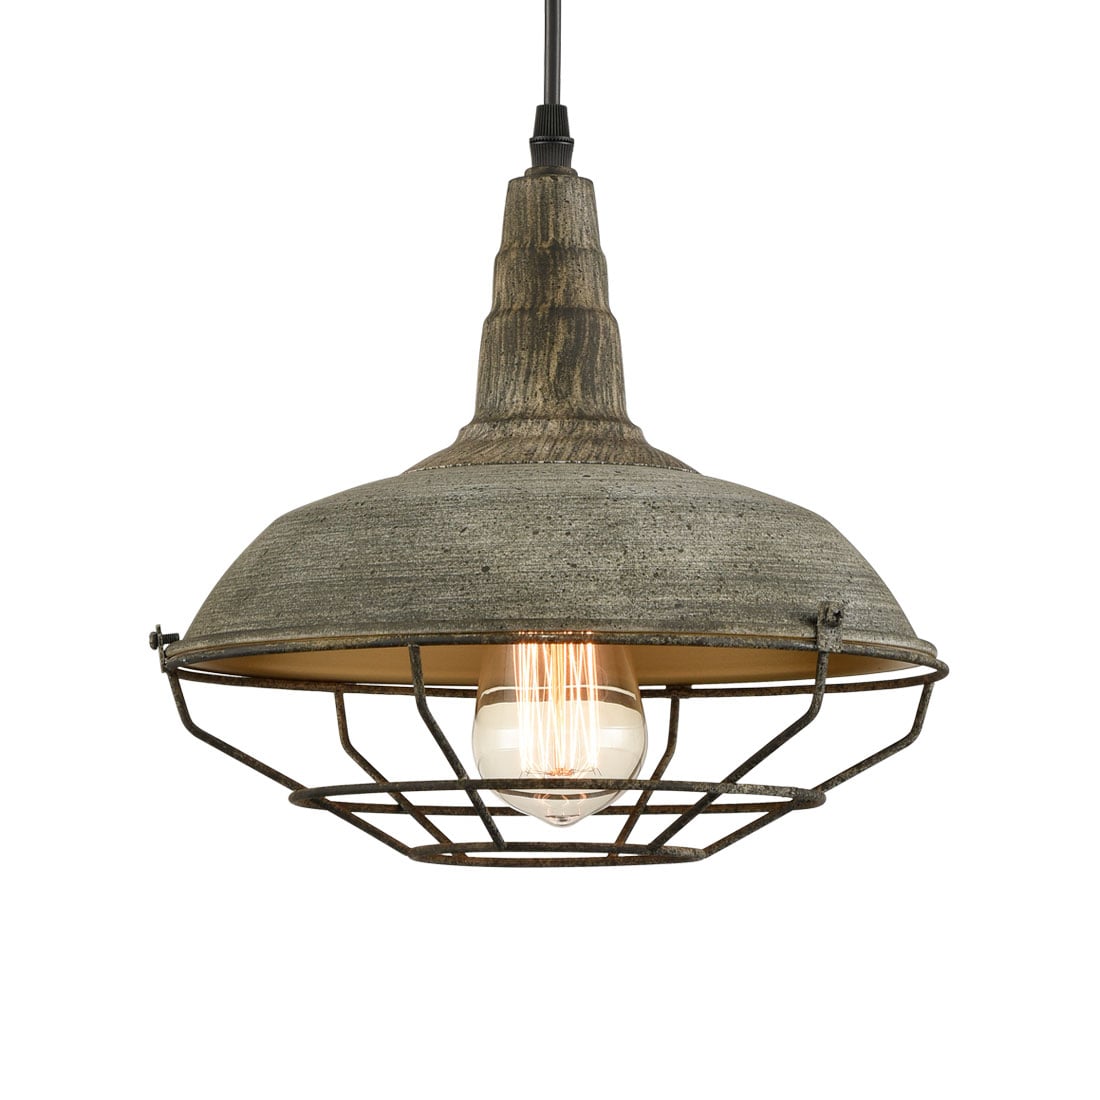 Vintage Industrial Easy Fit Ceiling Pendant Light Bulb Cage Vintage Lamp shade 